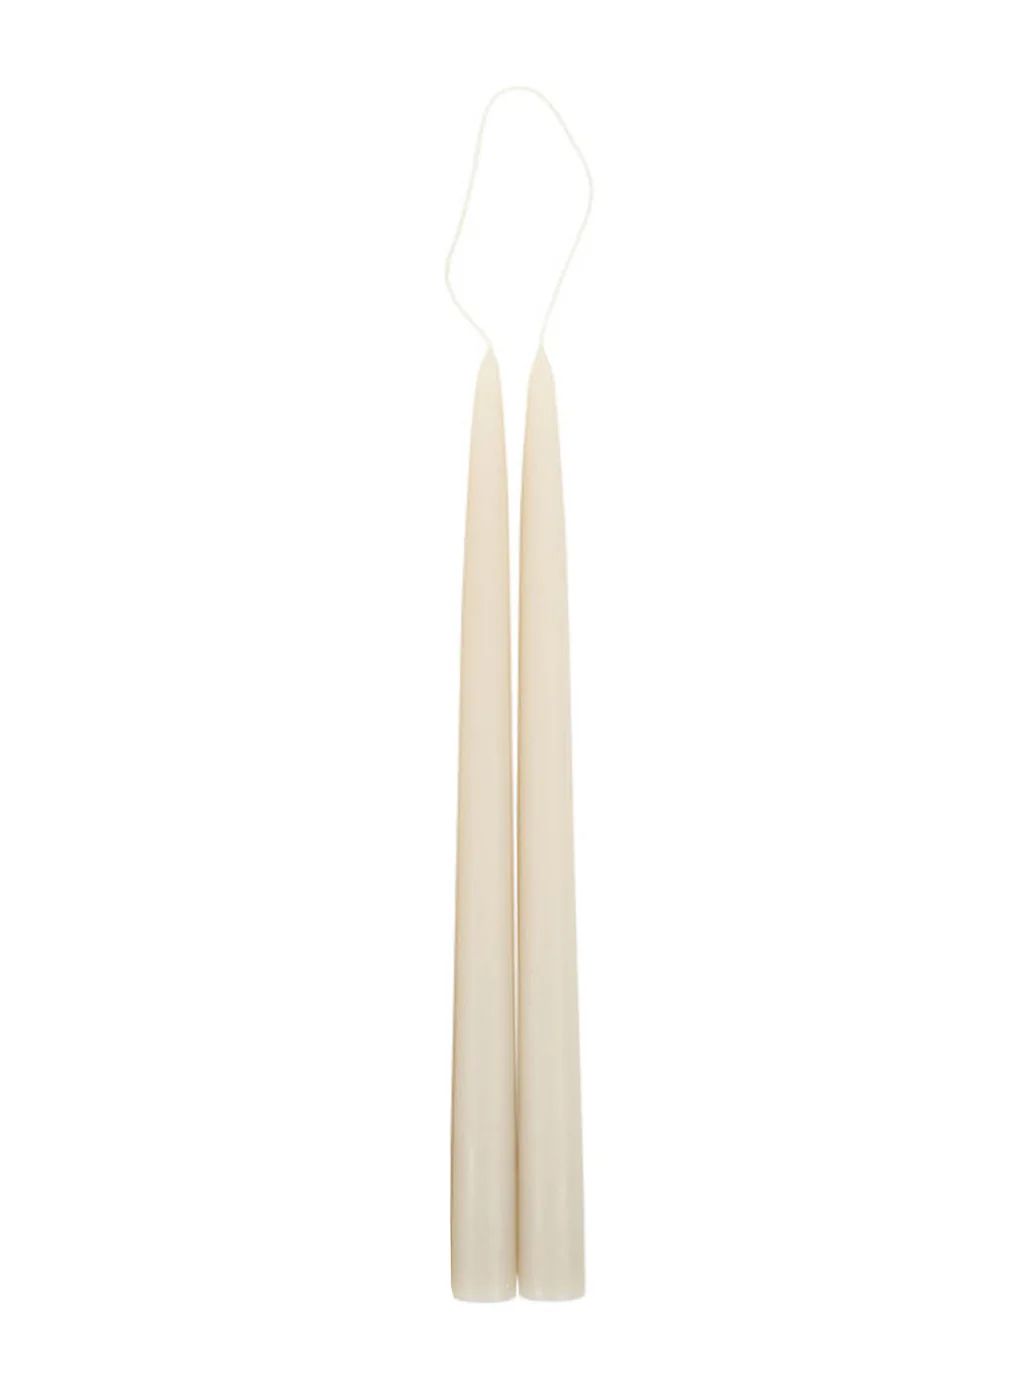 Parchment Taper Candles, Set of 2 | House of Jade Home